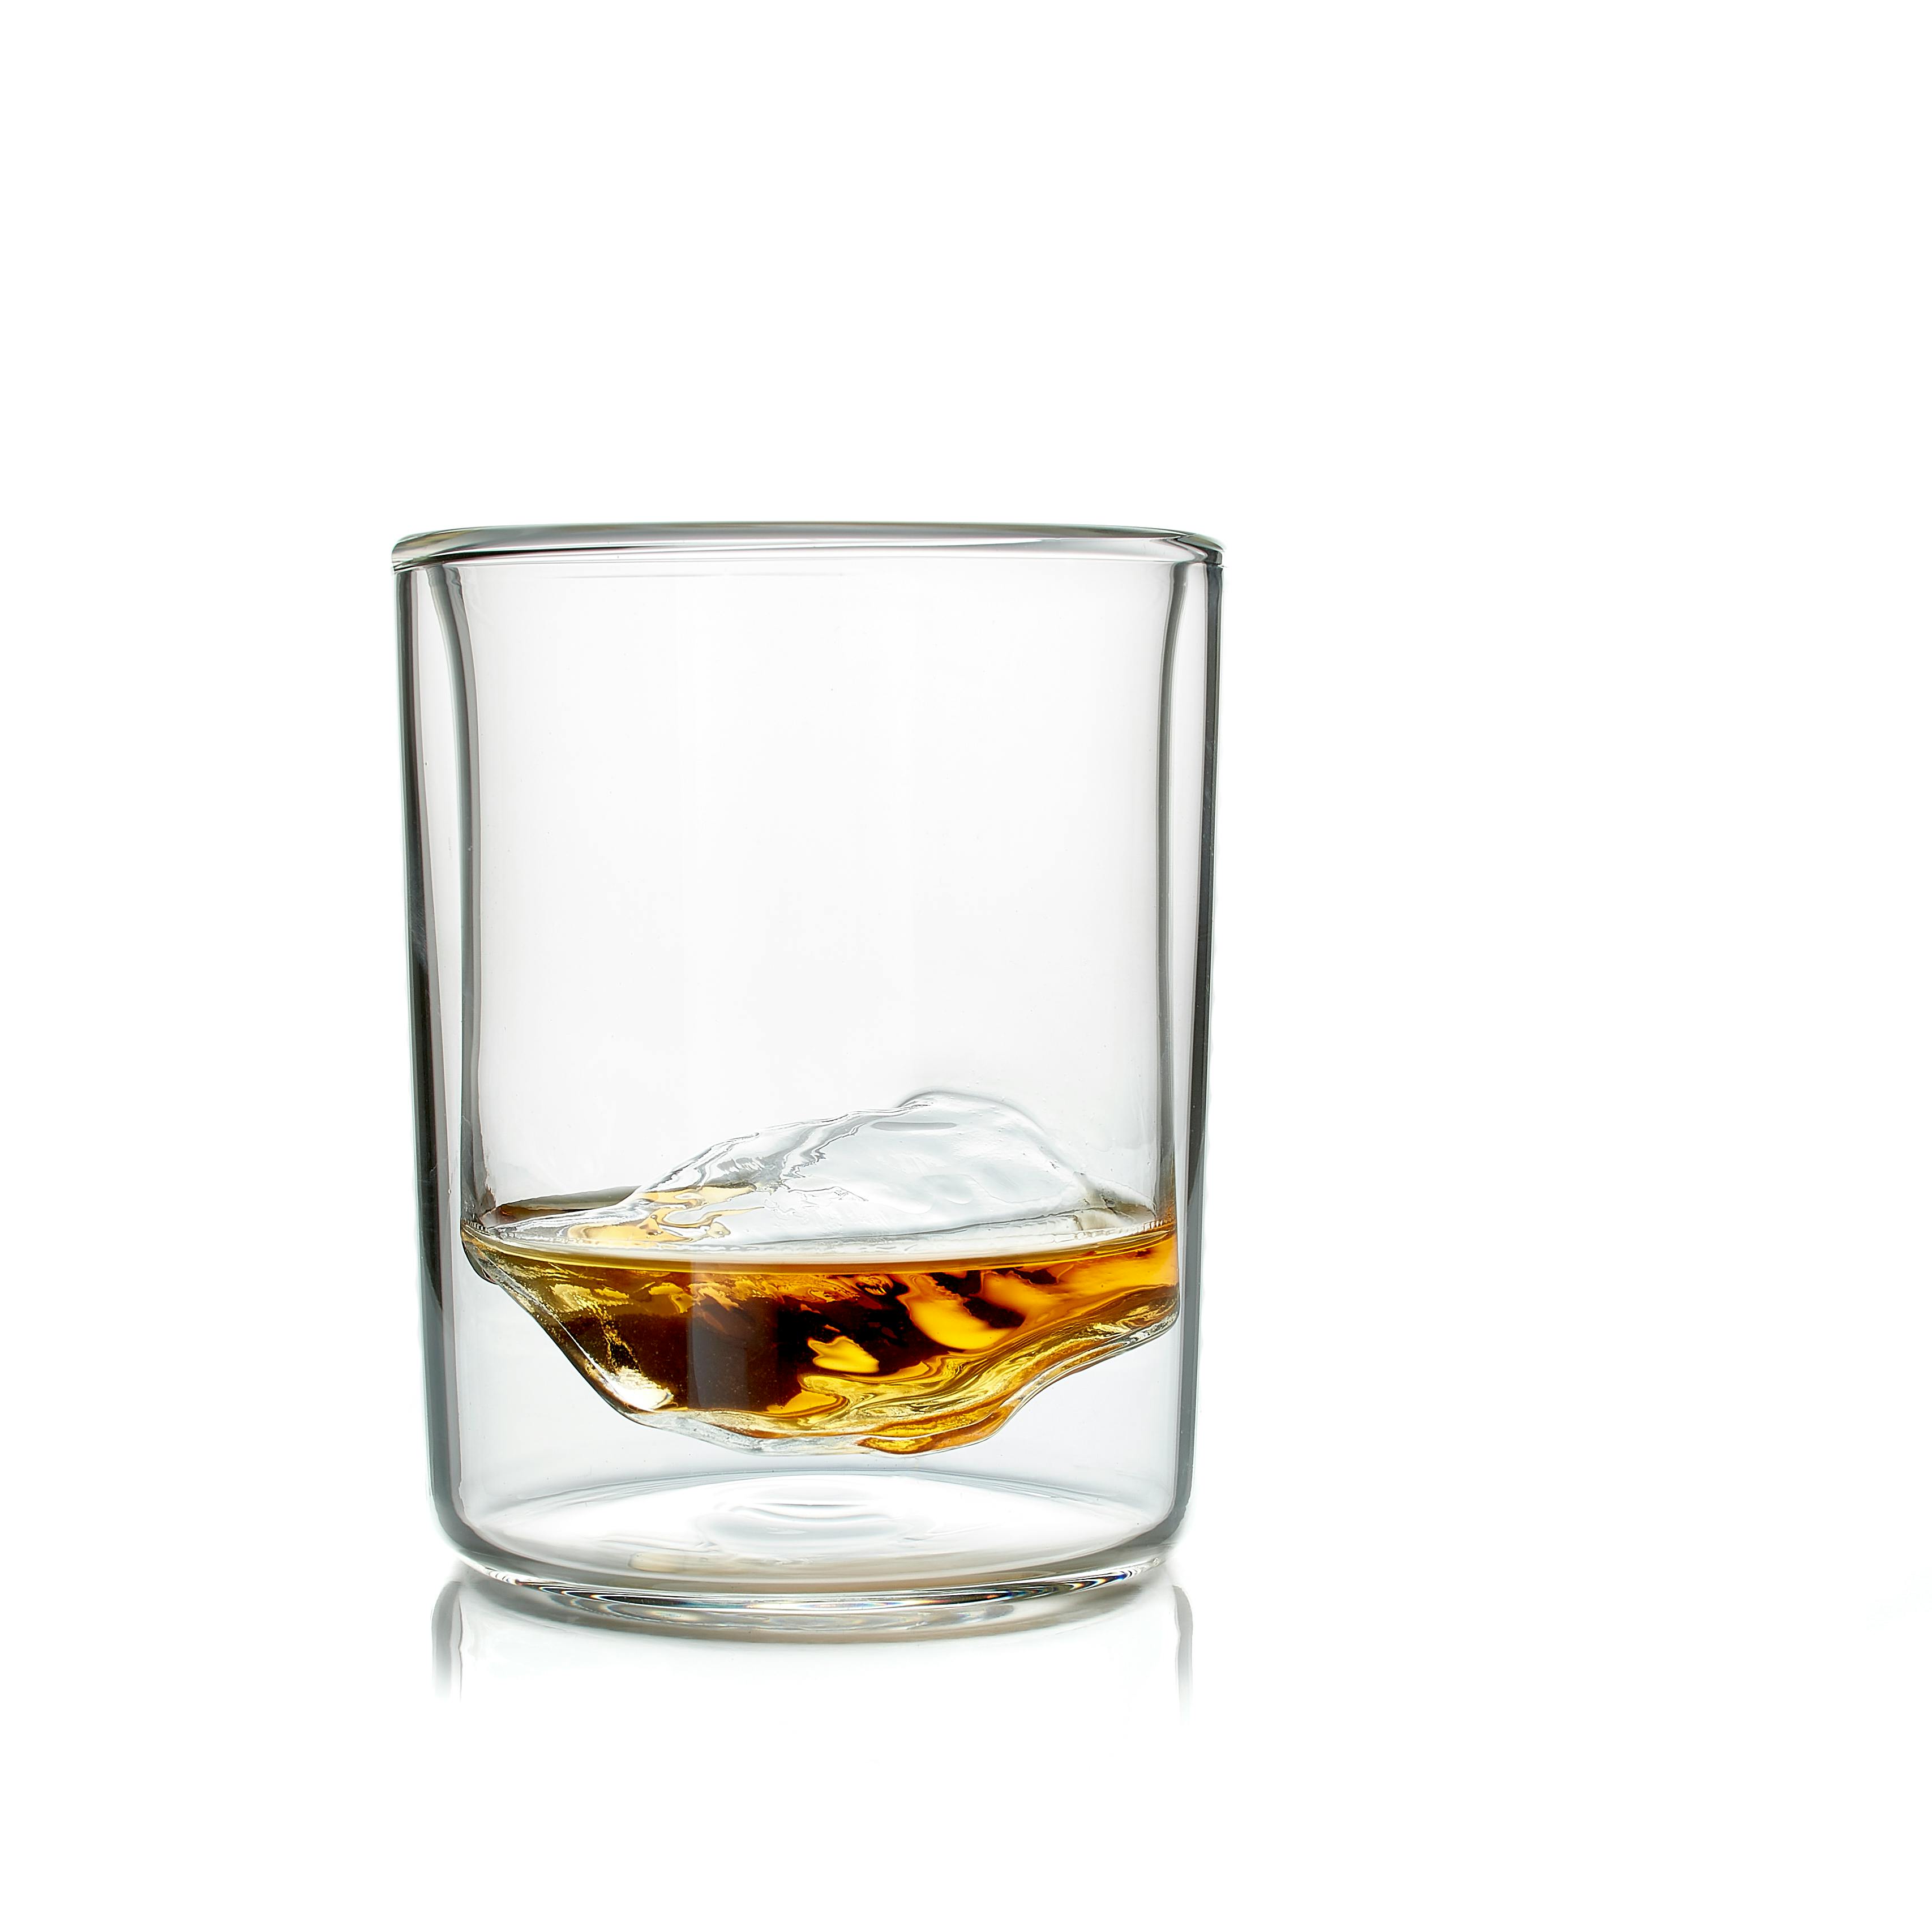 The Rockies - Set of 4 Whiskey Glasses